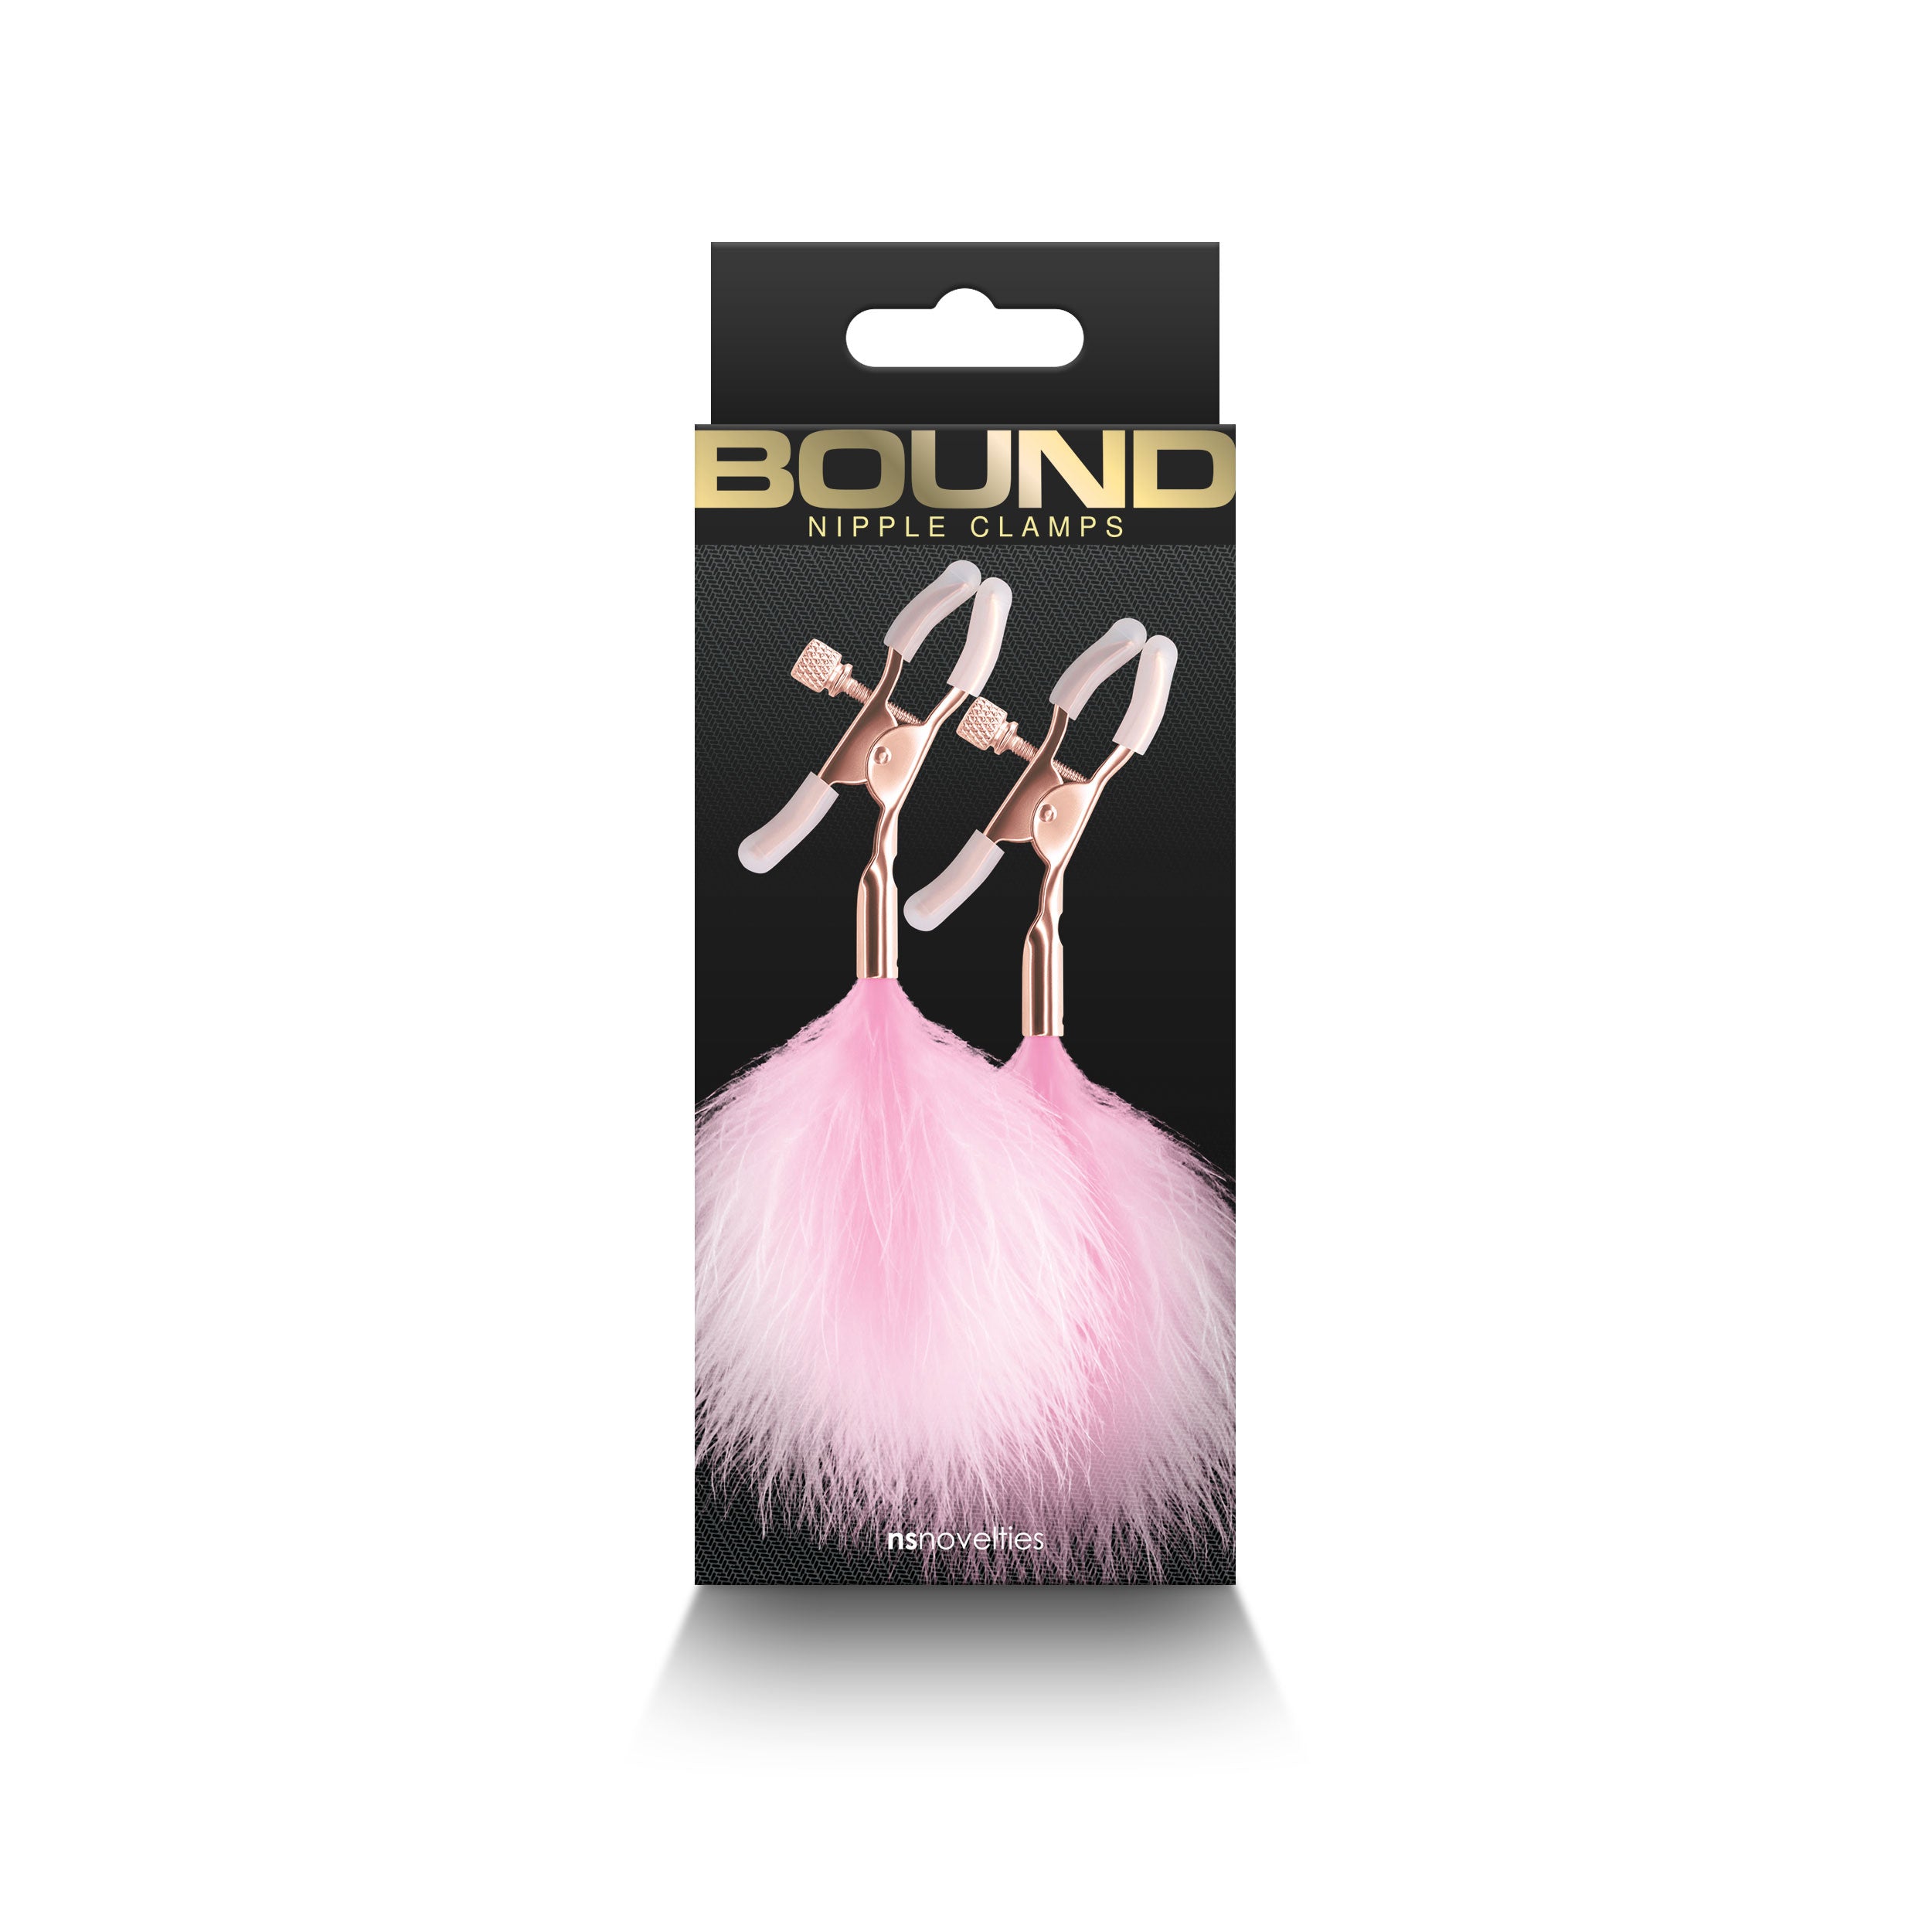 Bound - Nipple Clamps - F1 - Pink-0